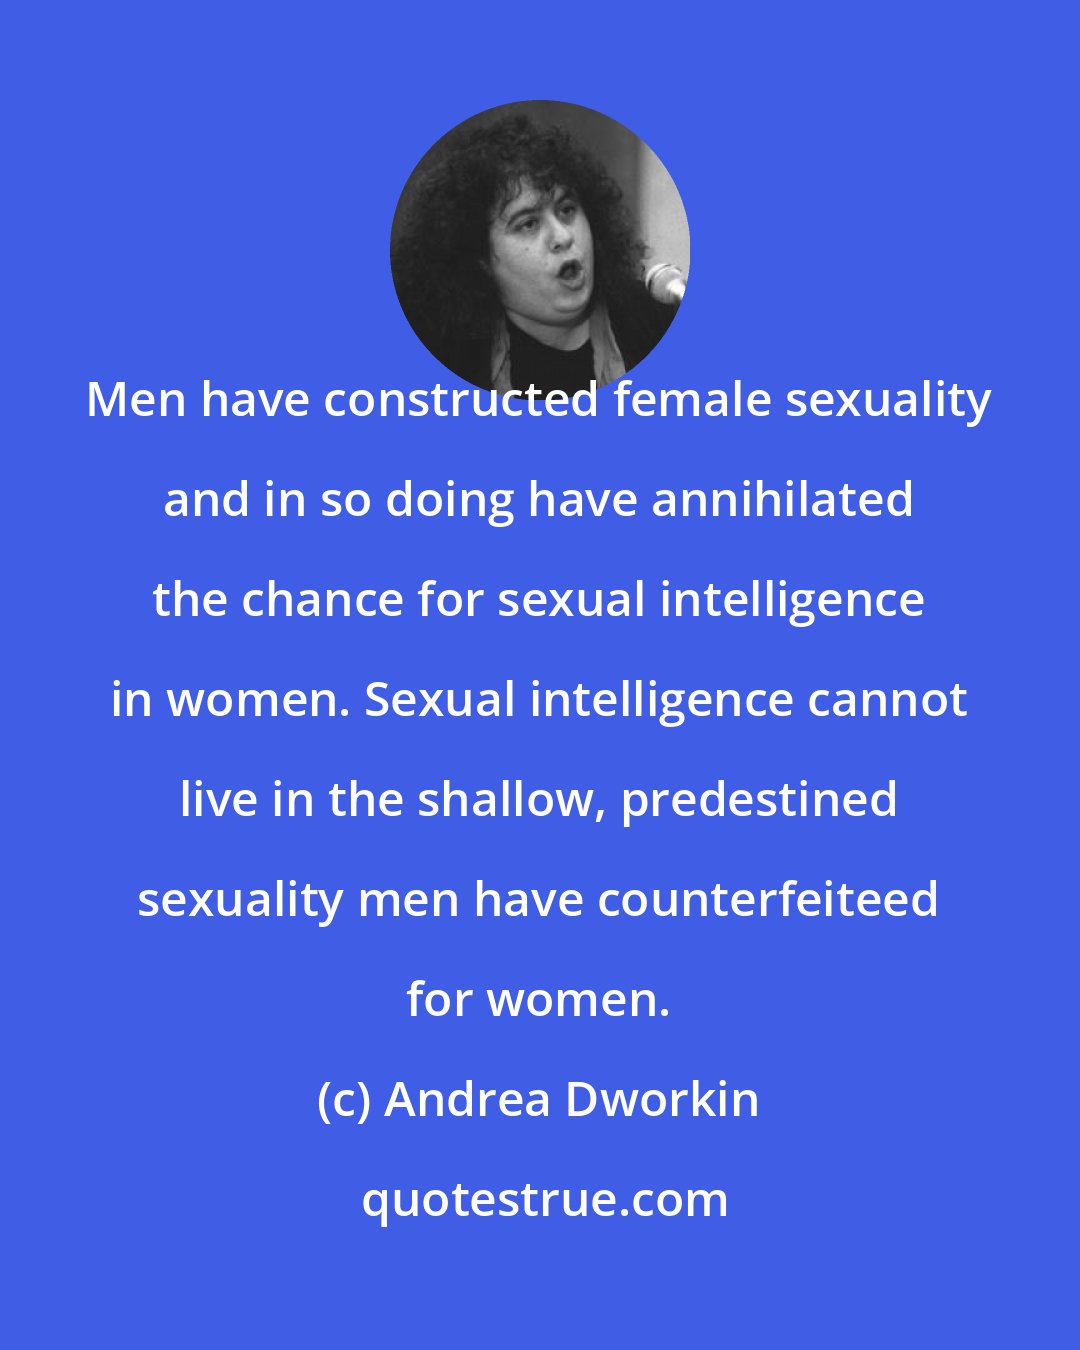 Andrea Dworkin: Men have constructed female sexuality and in so doing have annihilated the chance for sexual intelligence in women. Sexual intelligence cannot live in the shallow, predestined sexuality men have counterfeiteed for women.